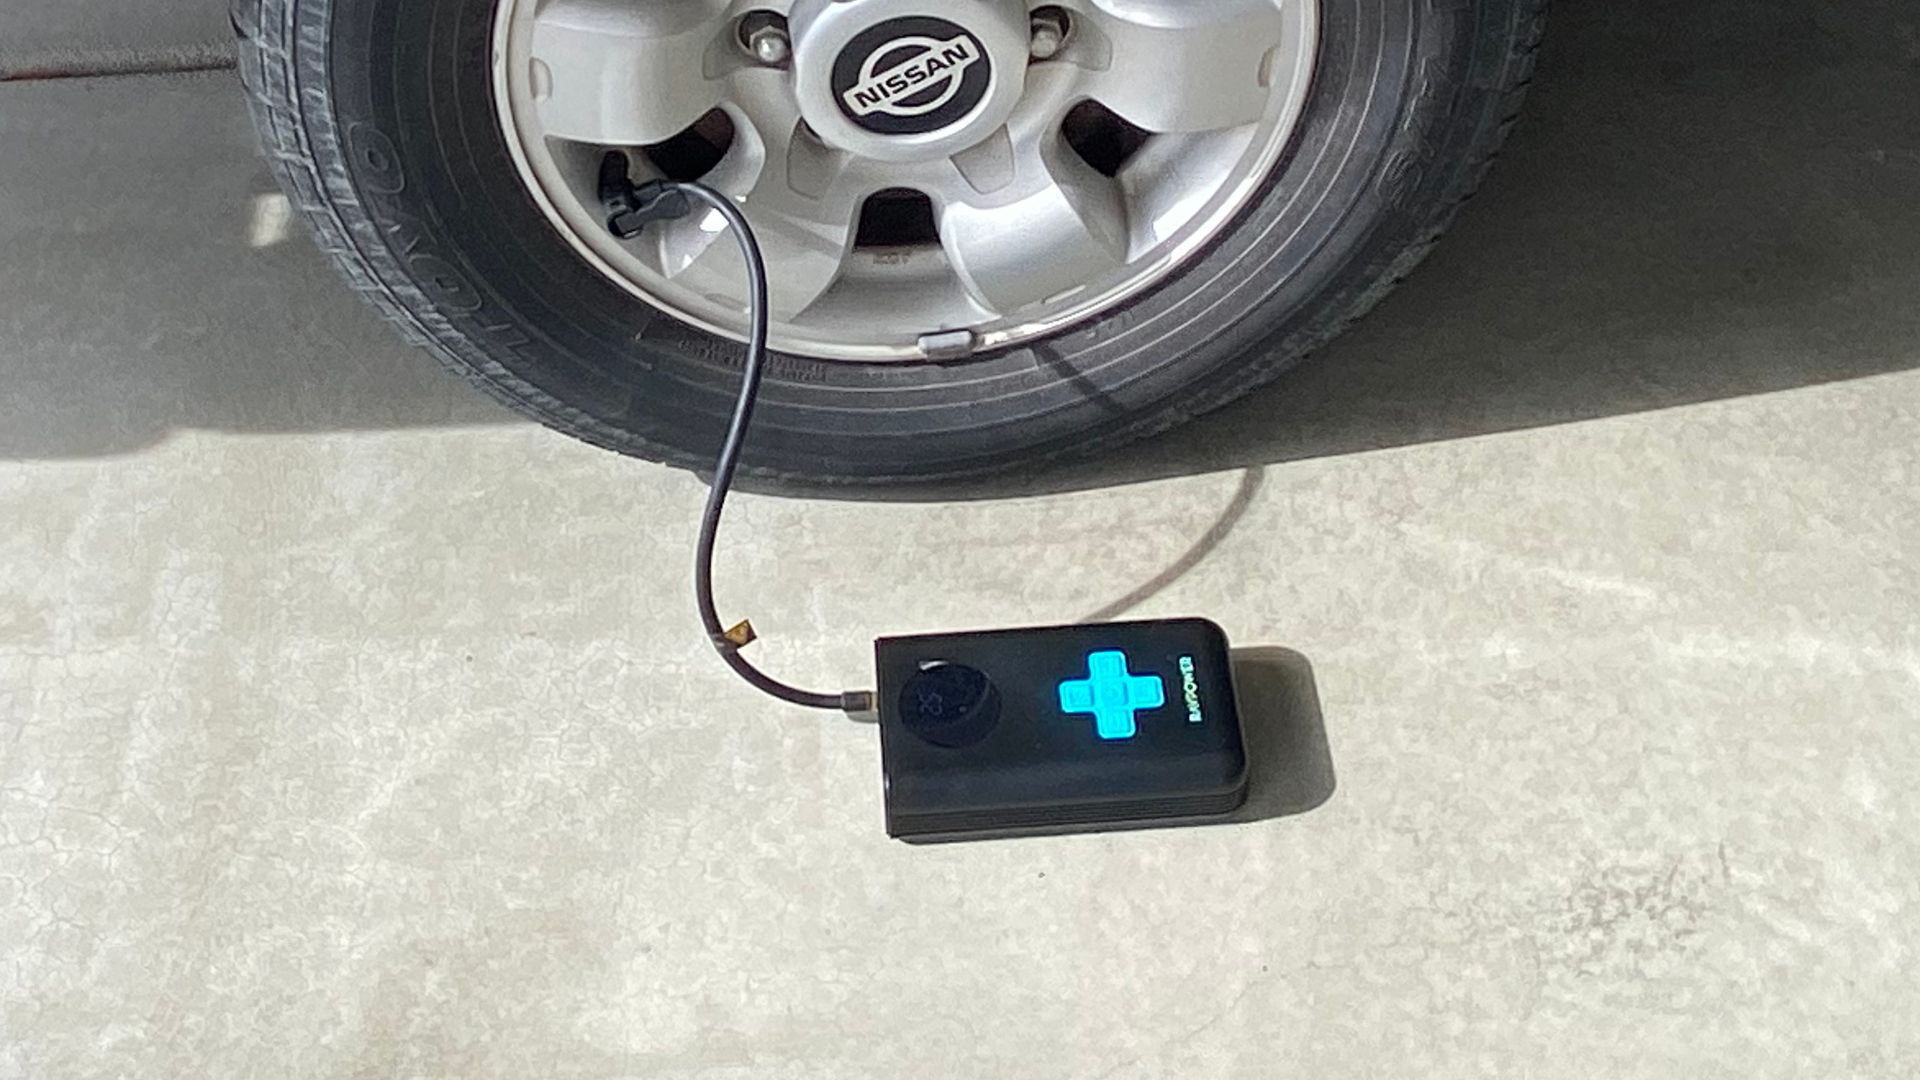 The RAVPower Jump Starter With Air Compressor attached to a tire.